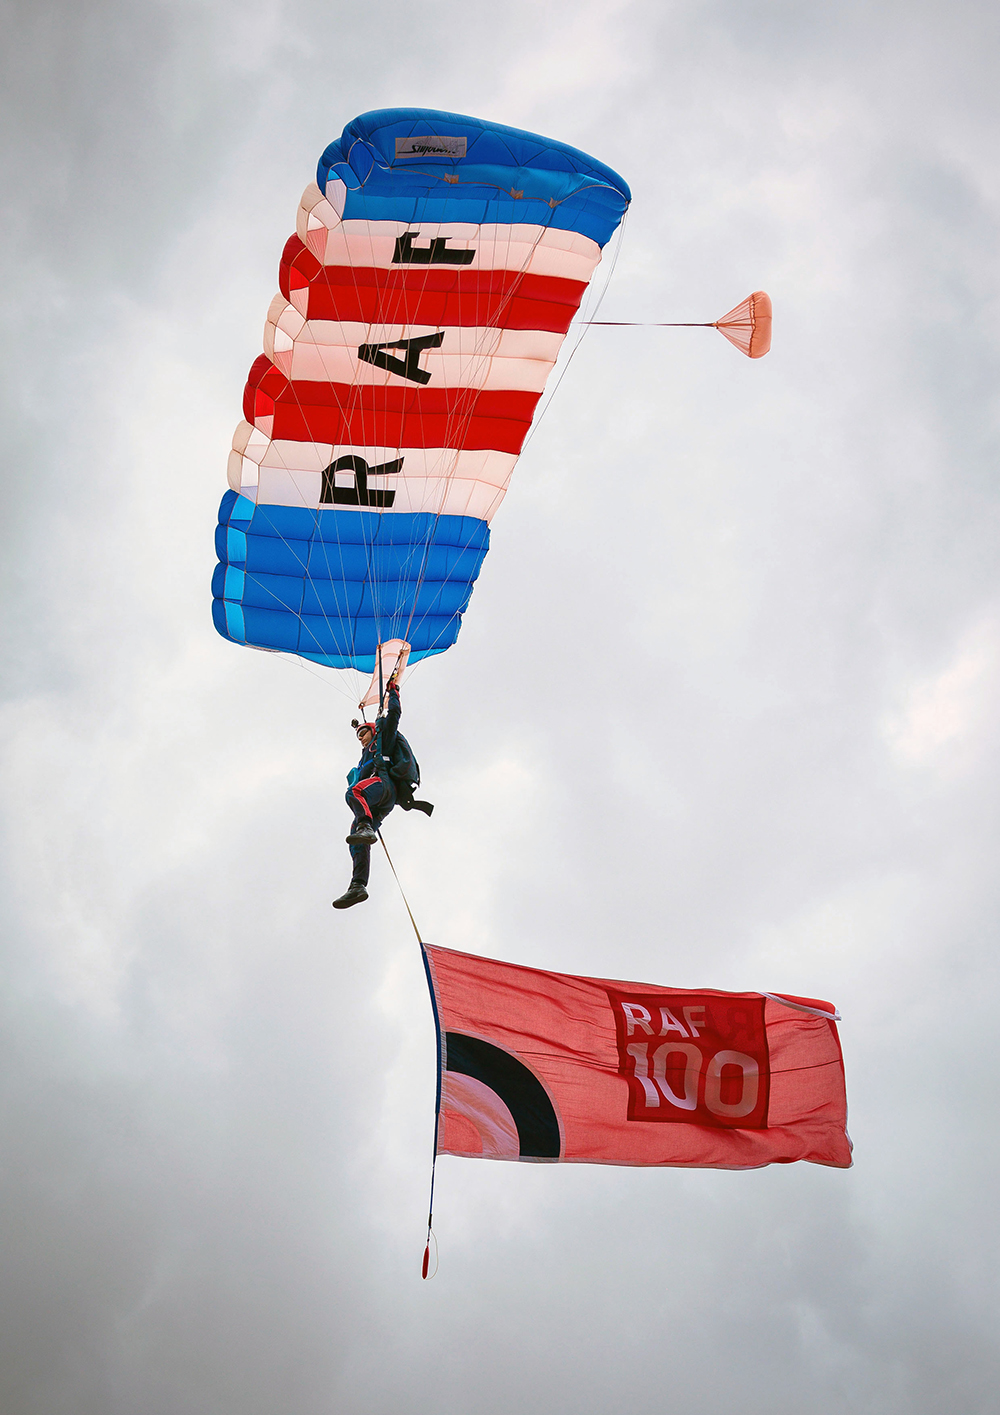 Sergeant Lee Coonan, Second Year Falcon jumps with the RAF ensign at Carterton Community College on 17th July 2018 to mark the end of the RAF100 STEM challenge